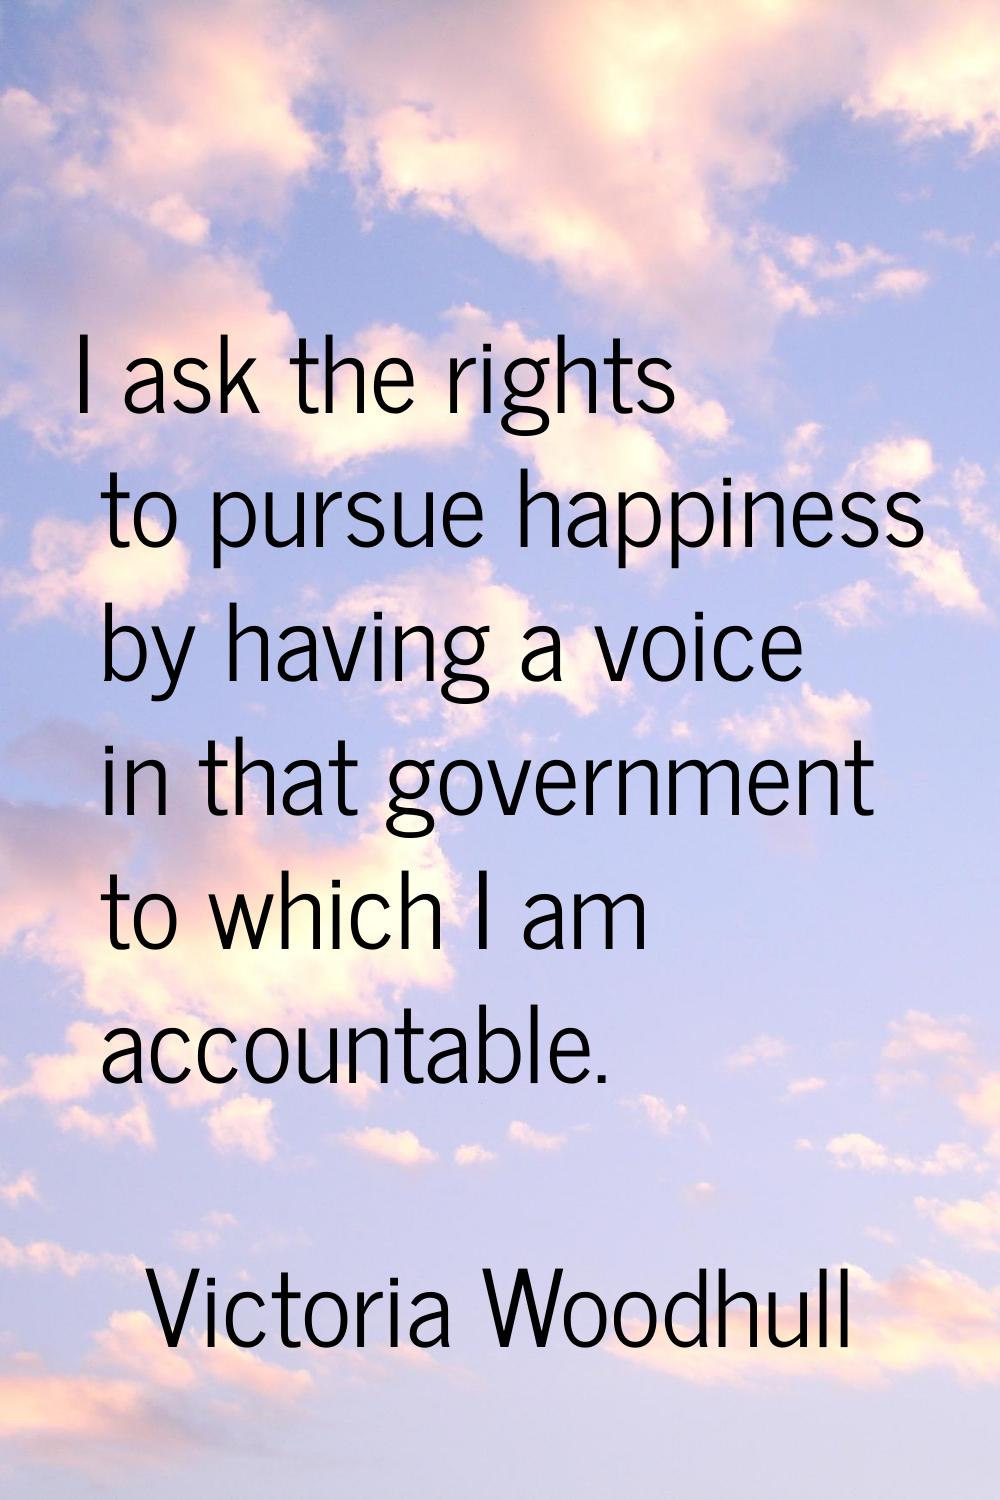 I ask the rights to pursue happiness by having a voice in that government to which I am accountable